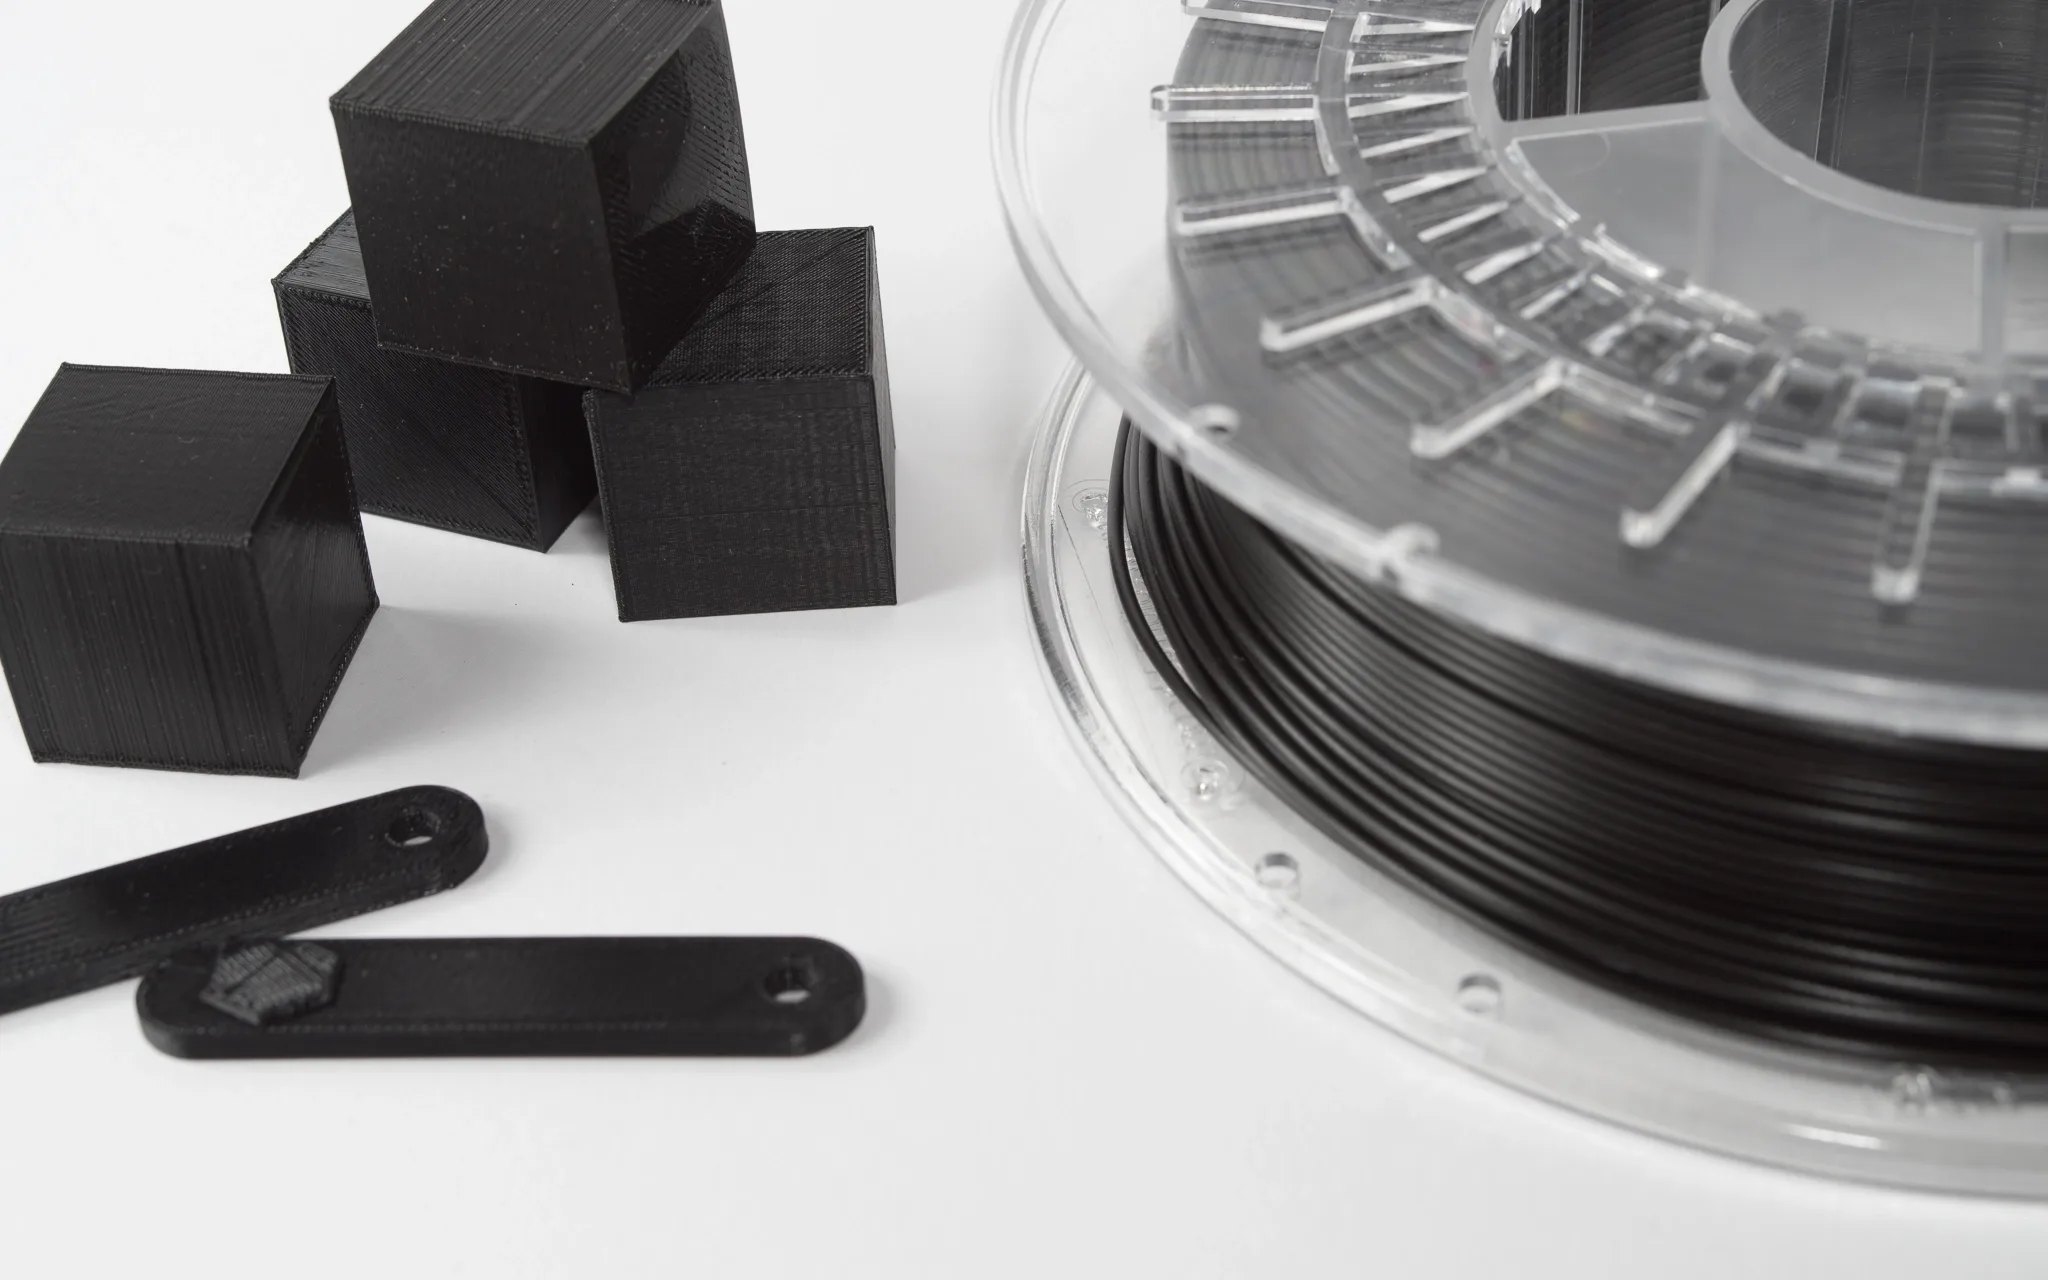 3D printing with PLA vs. ABS: What's the difference?